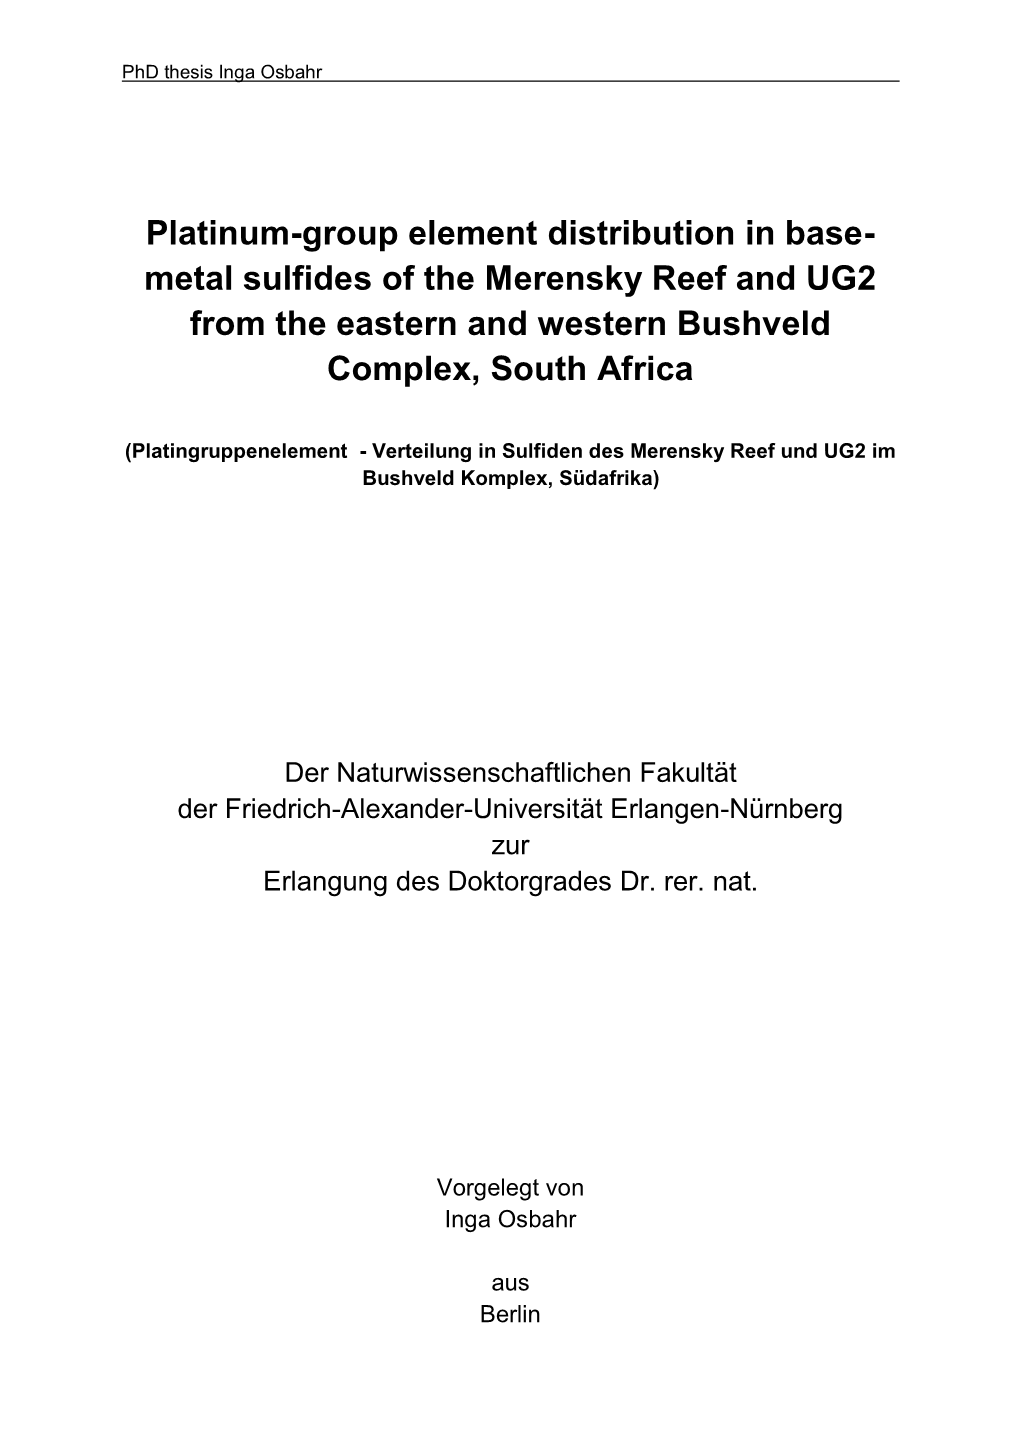 Platinum-Group Element Distribution in Base- Metal Sulfides of the Merensky Reef and UG2 from the Eastern and Western Bushveld Complex, South Africa